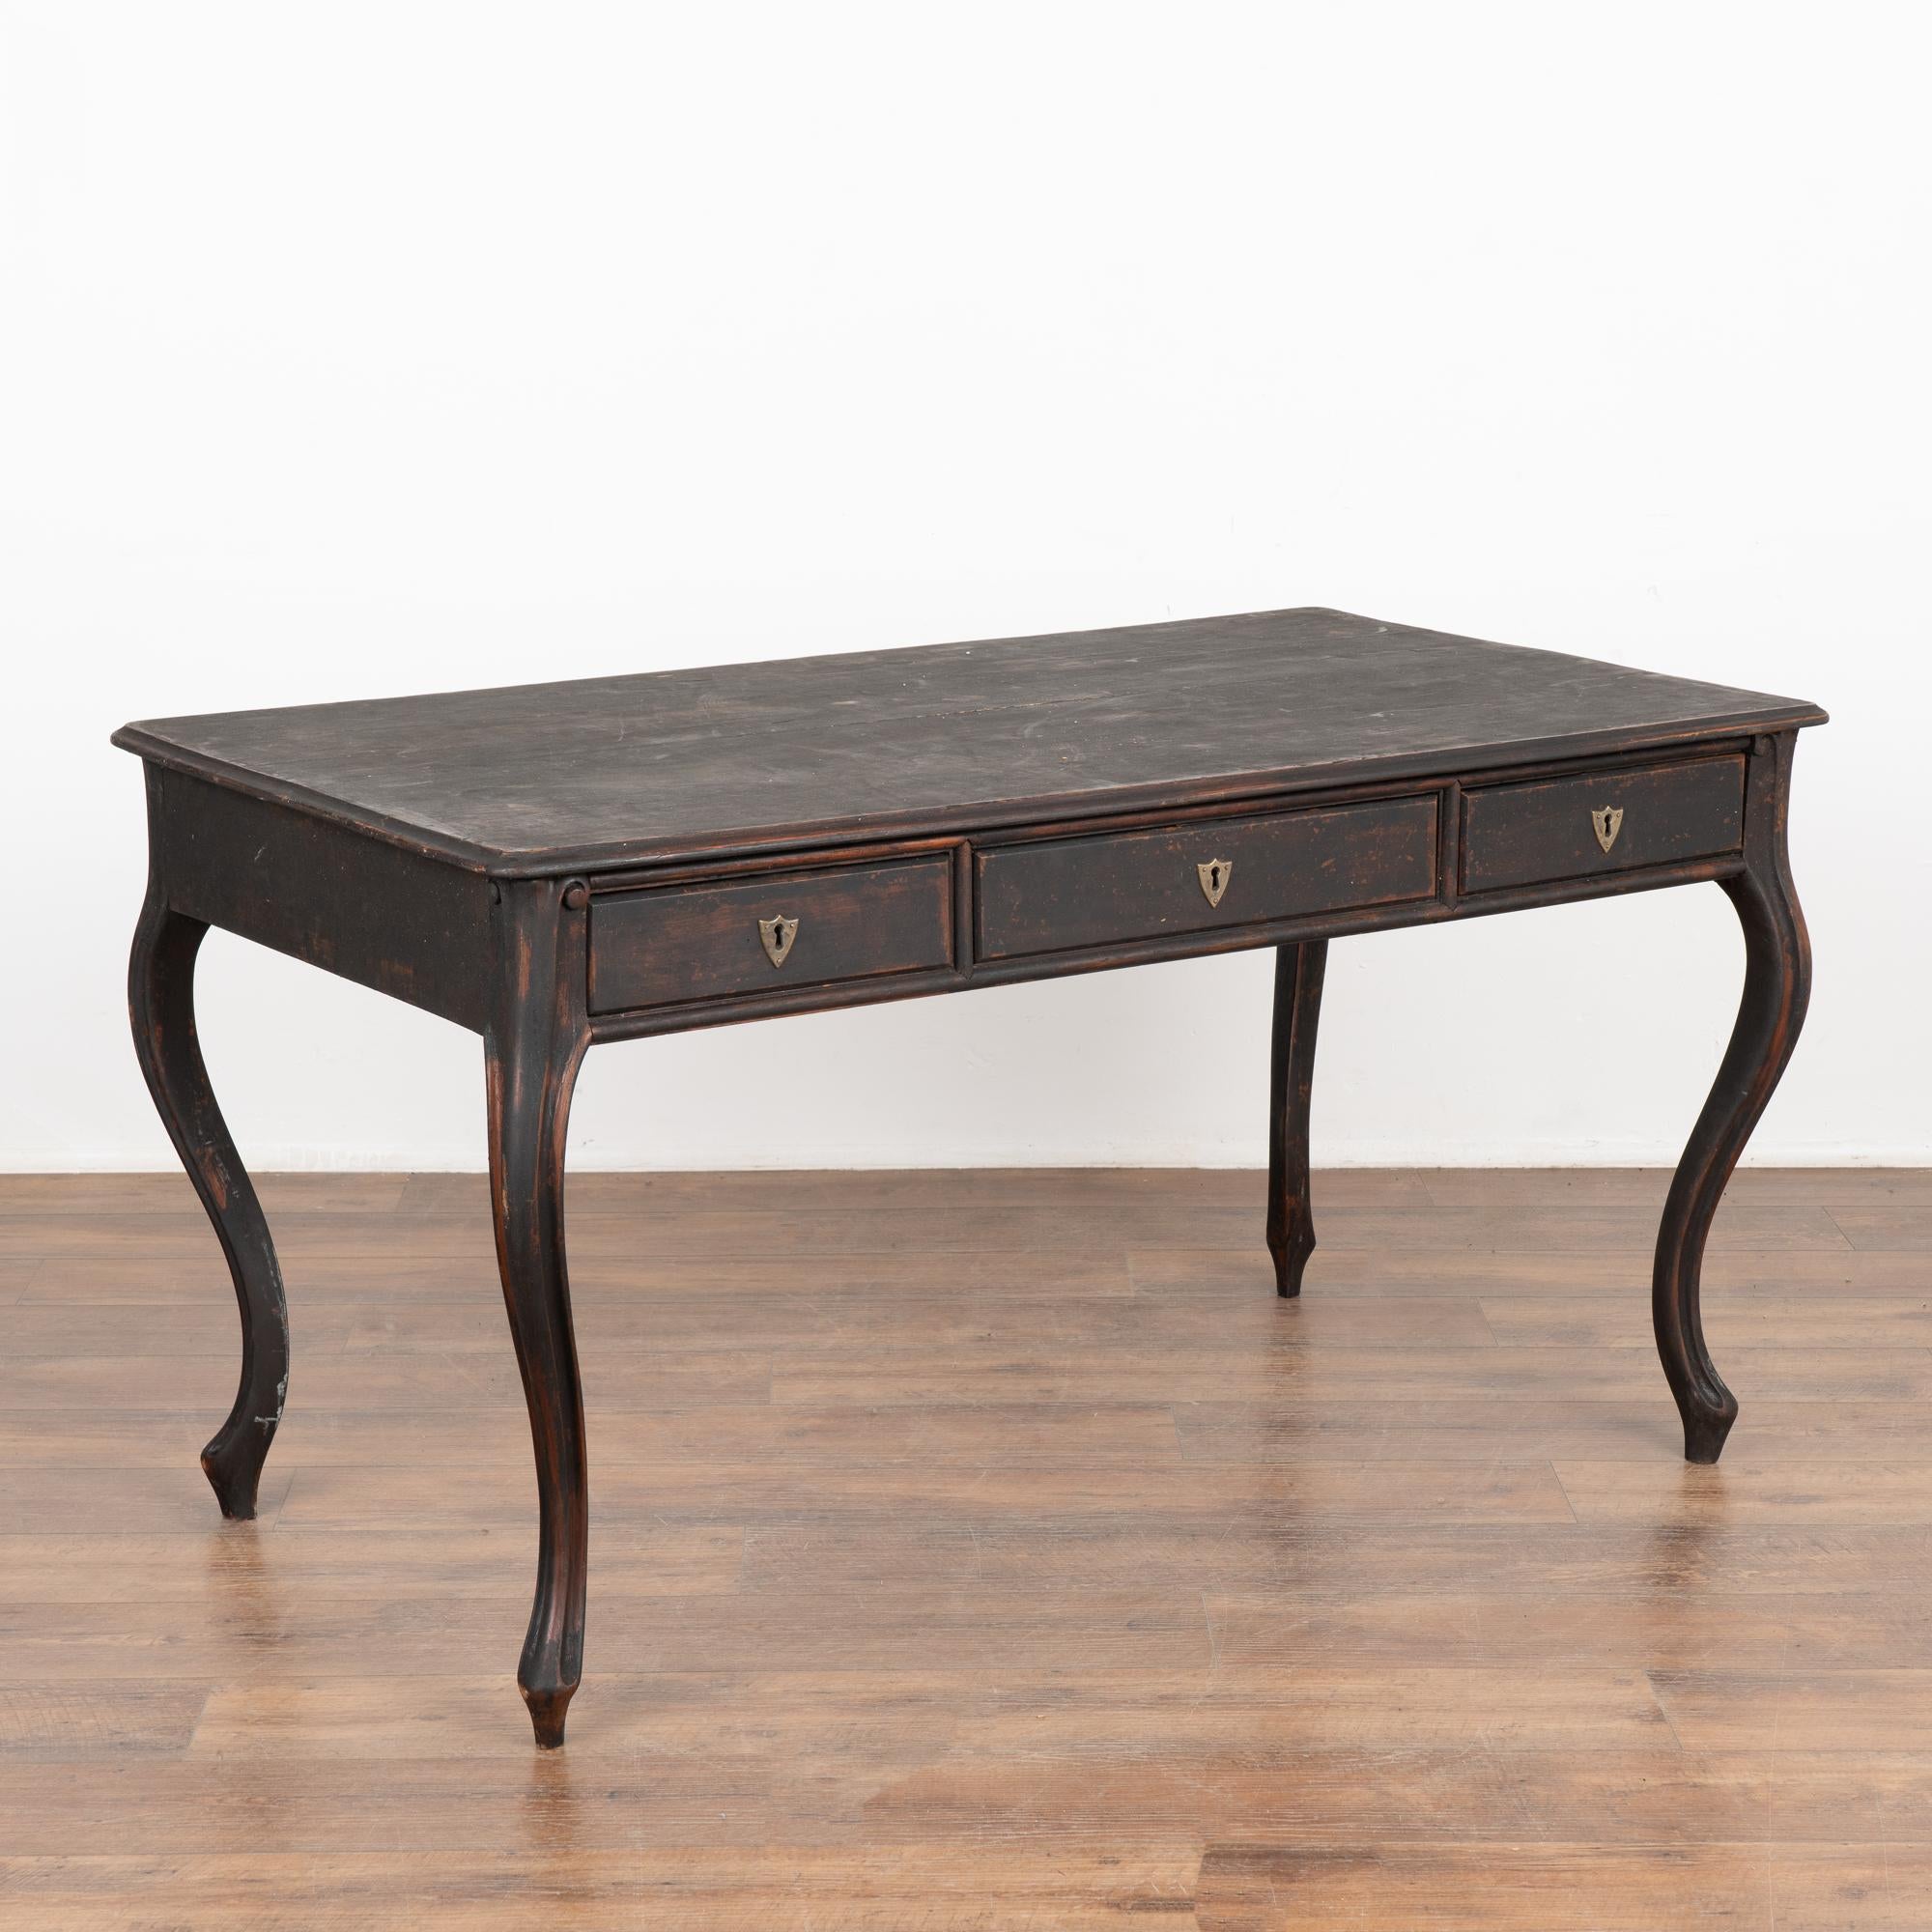 Three drawer pine desk with elongated cabriolet legs. 
Restored, later custom black painted finish which is lightly distressed to fit the age and grace of this lovely writing table. 
The old locks on each of the three drawers still function with one